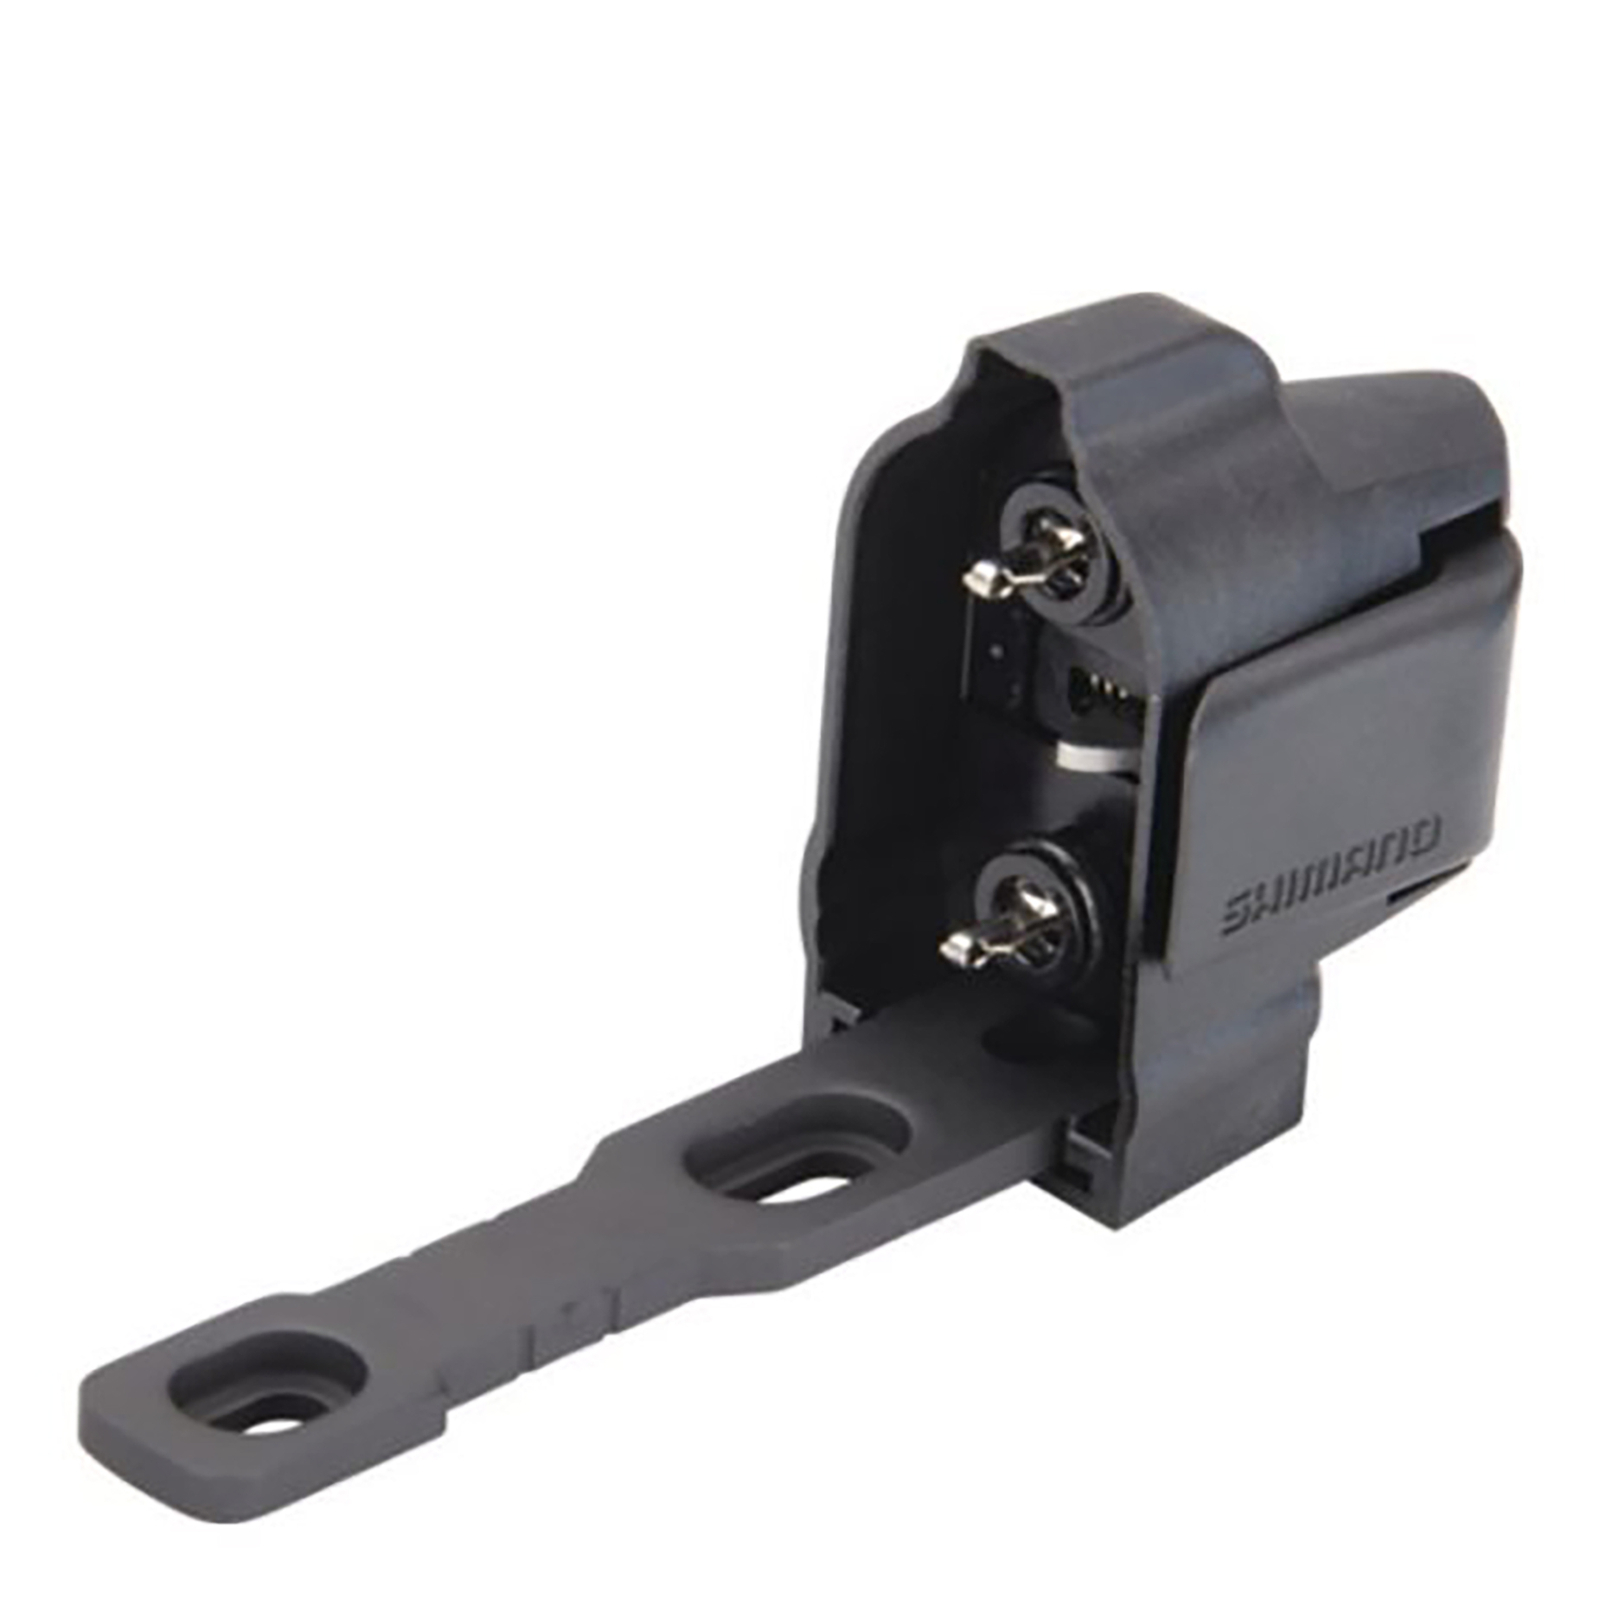 Shimano BM-DN100S Short Battery Mount for Frame Mount - external/internal battery wire routing